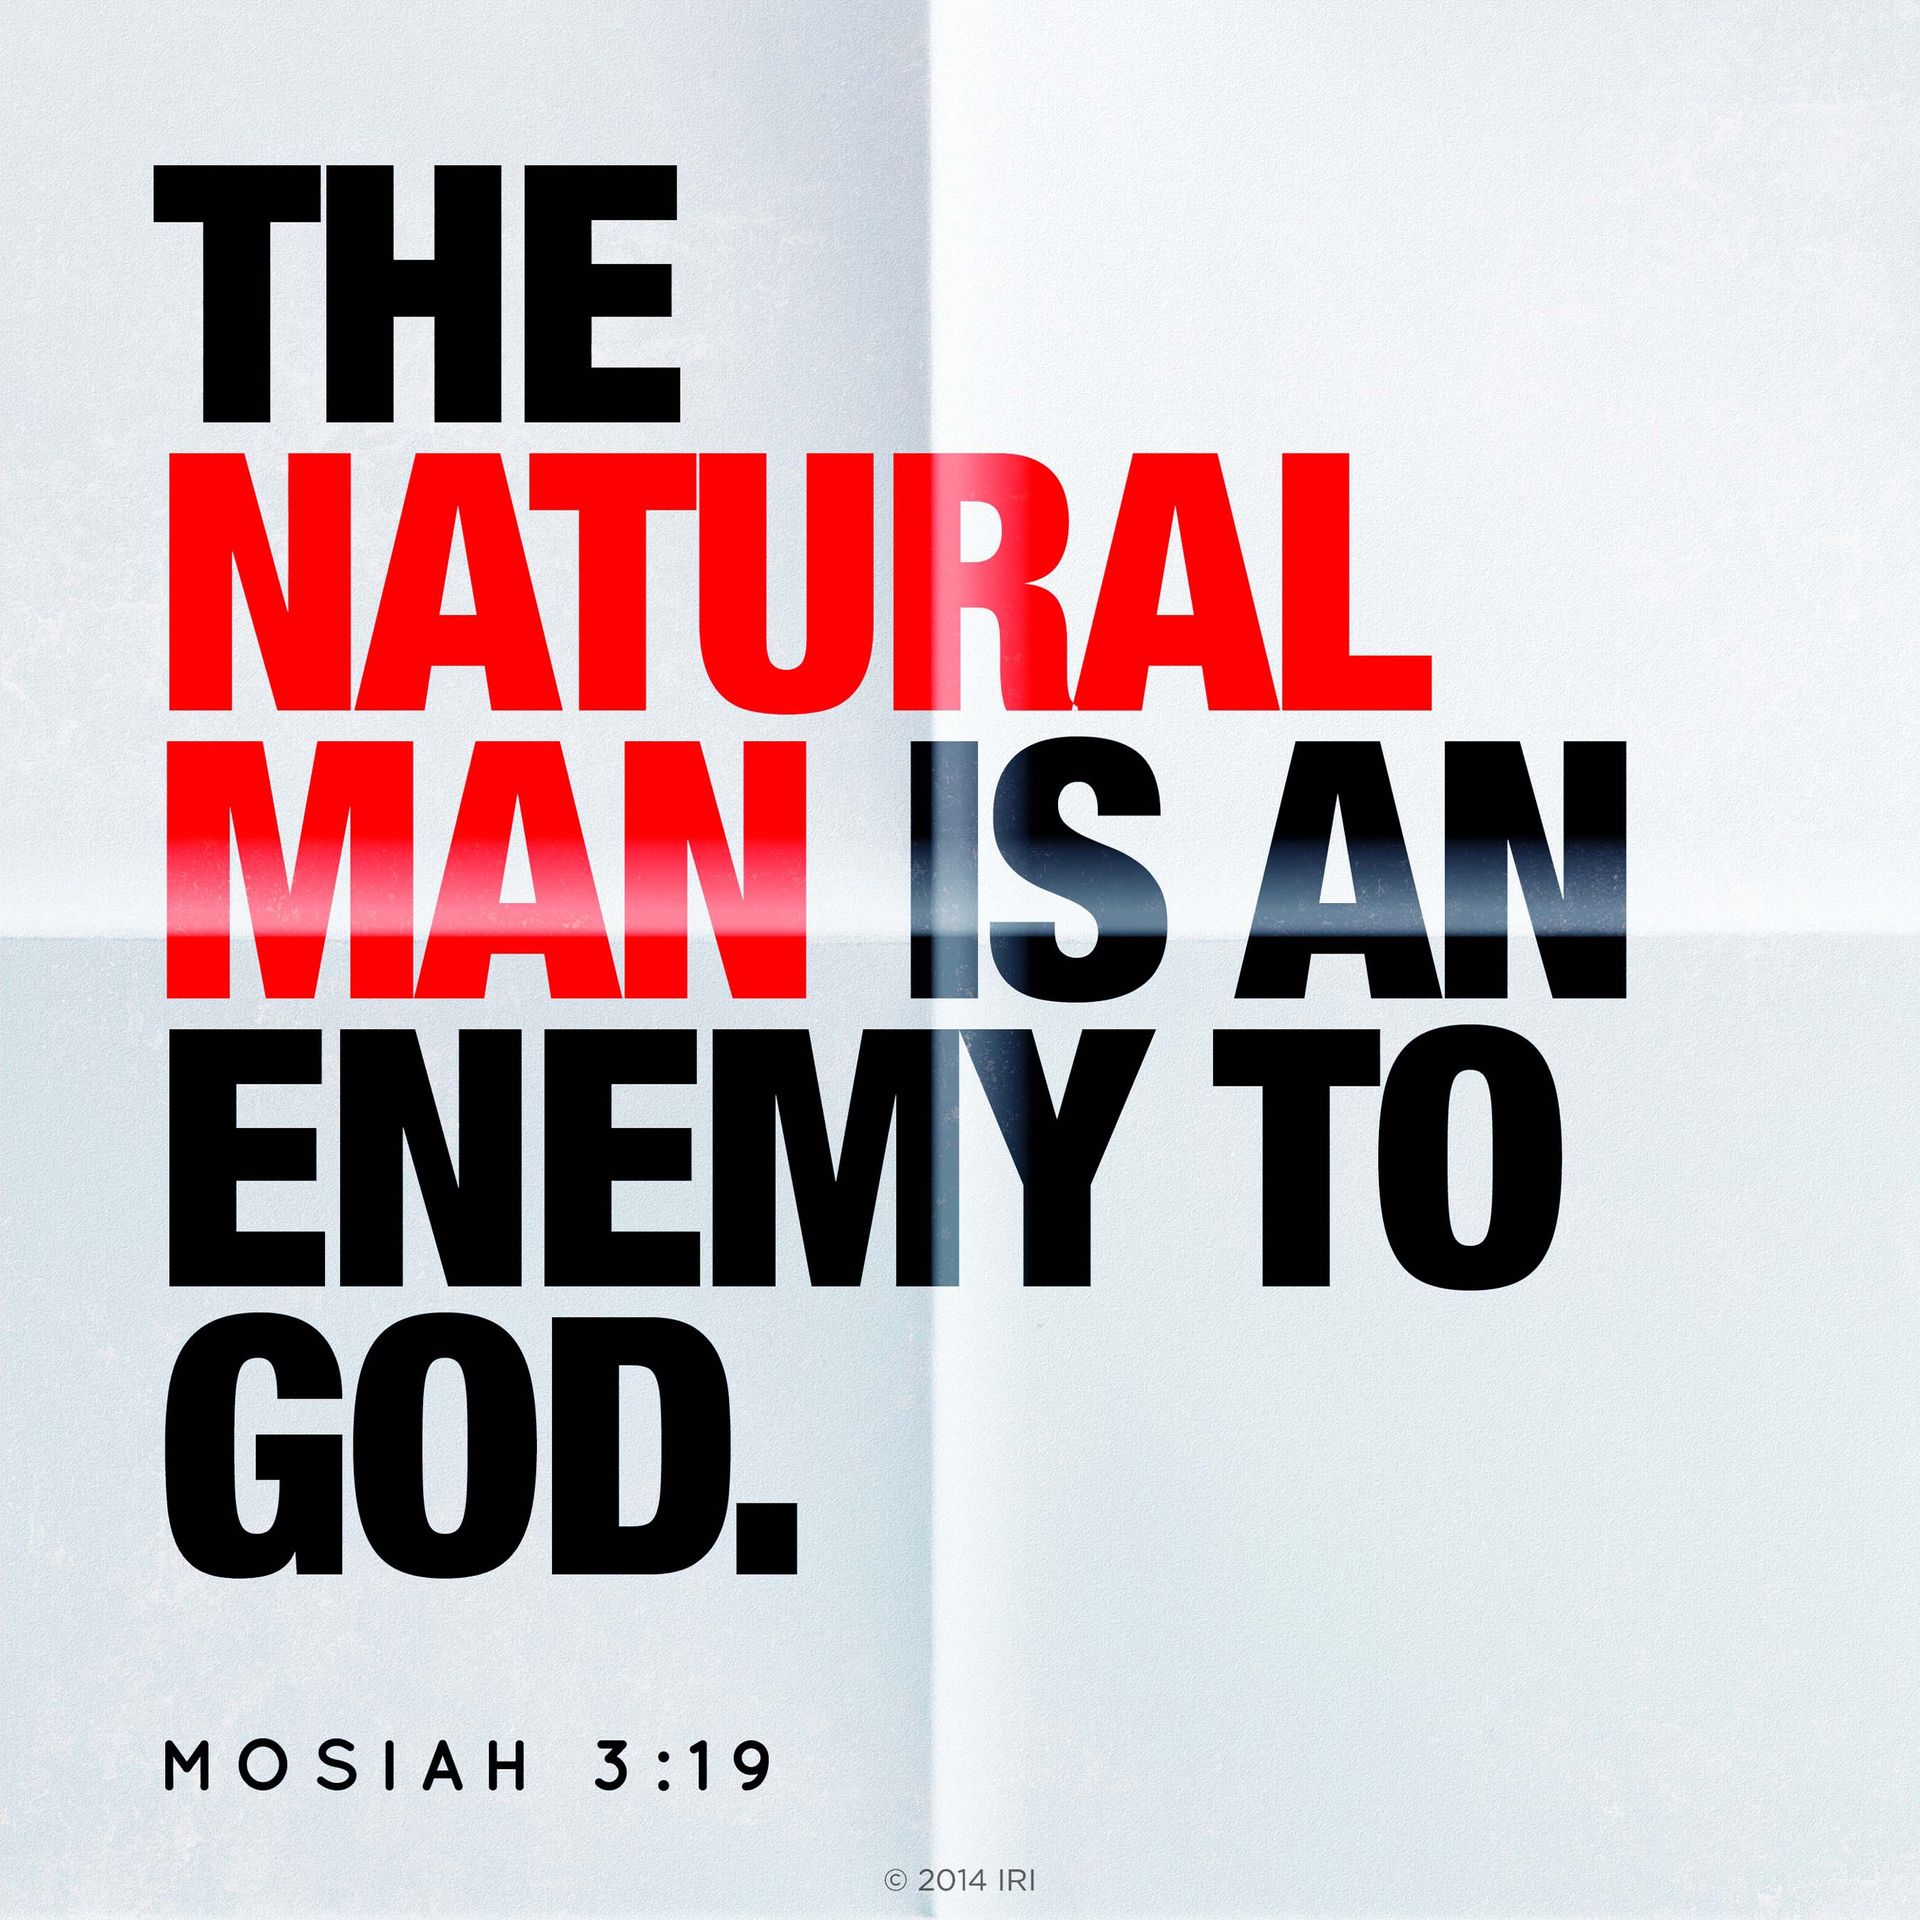 “The natural man is an enemy to God.”—Mosiah 3:19